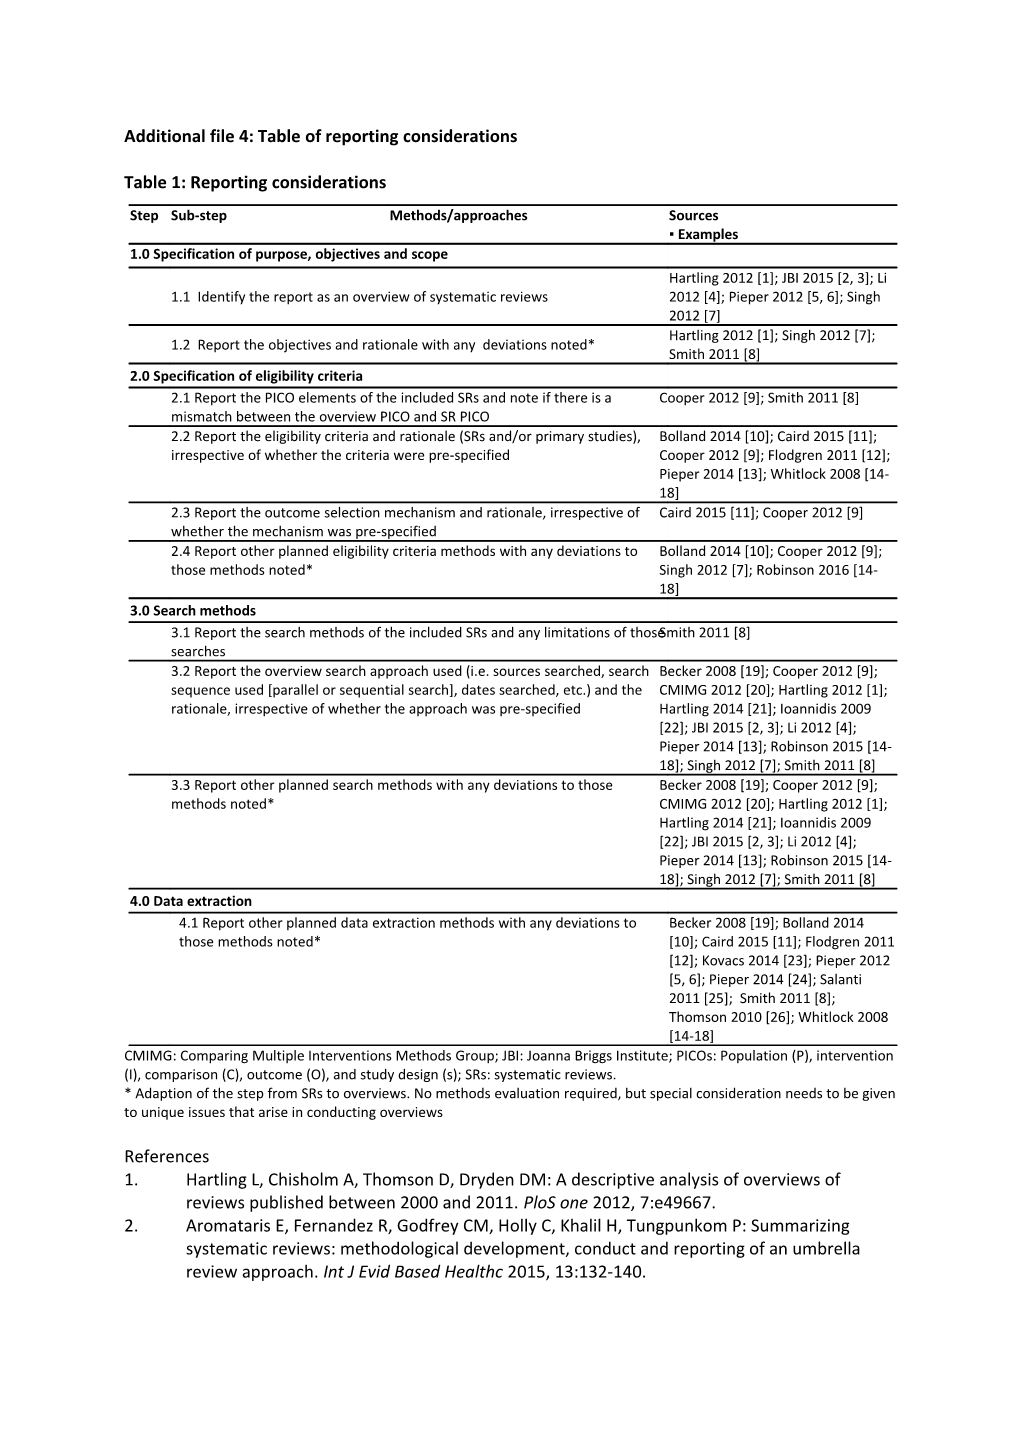 Additional File 4: Table of Reporting Considerations